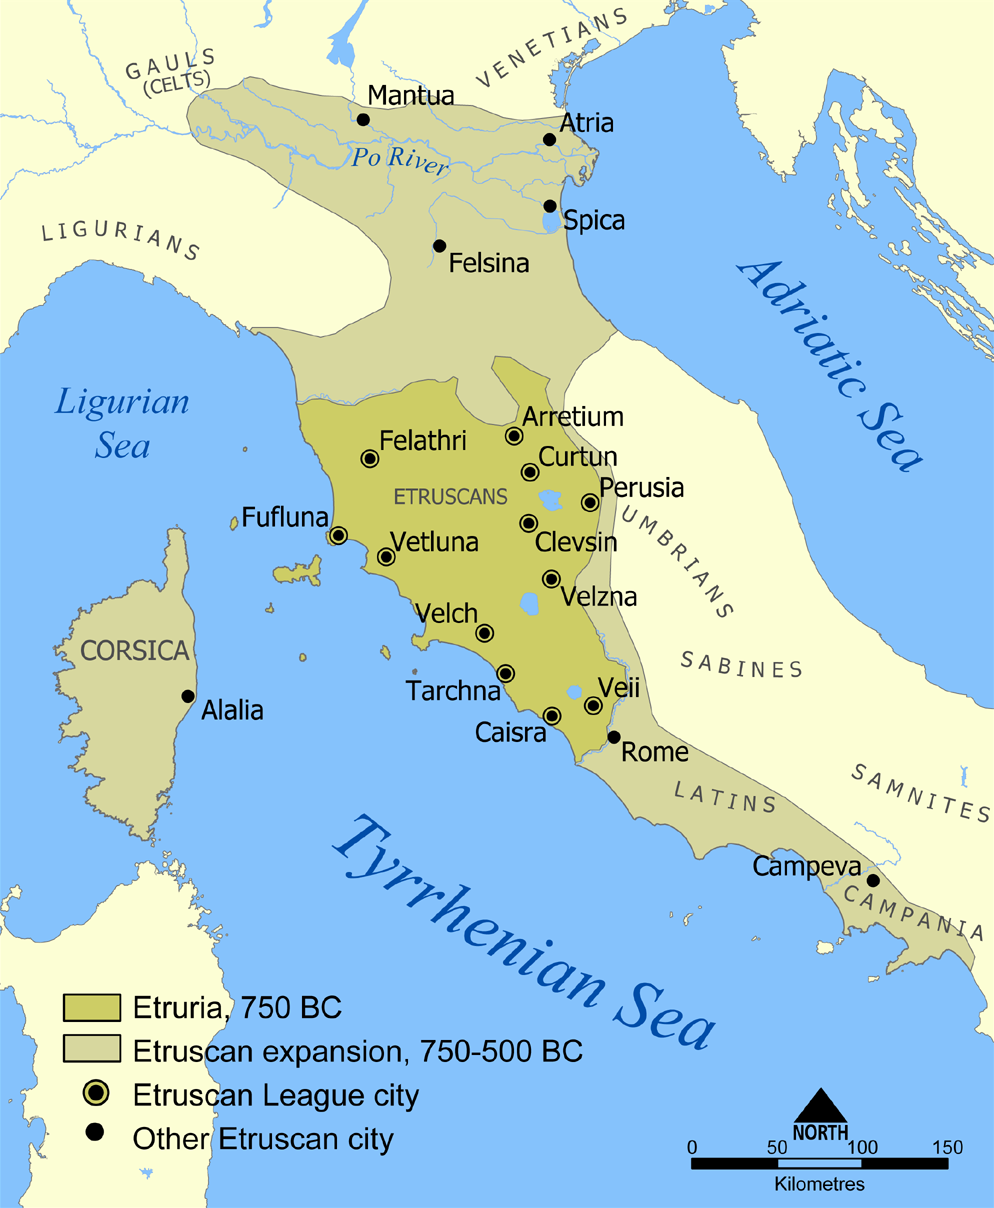 The area covered by the Etruscan civilization.